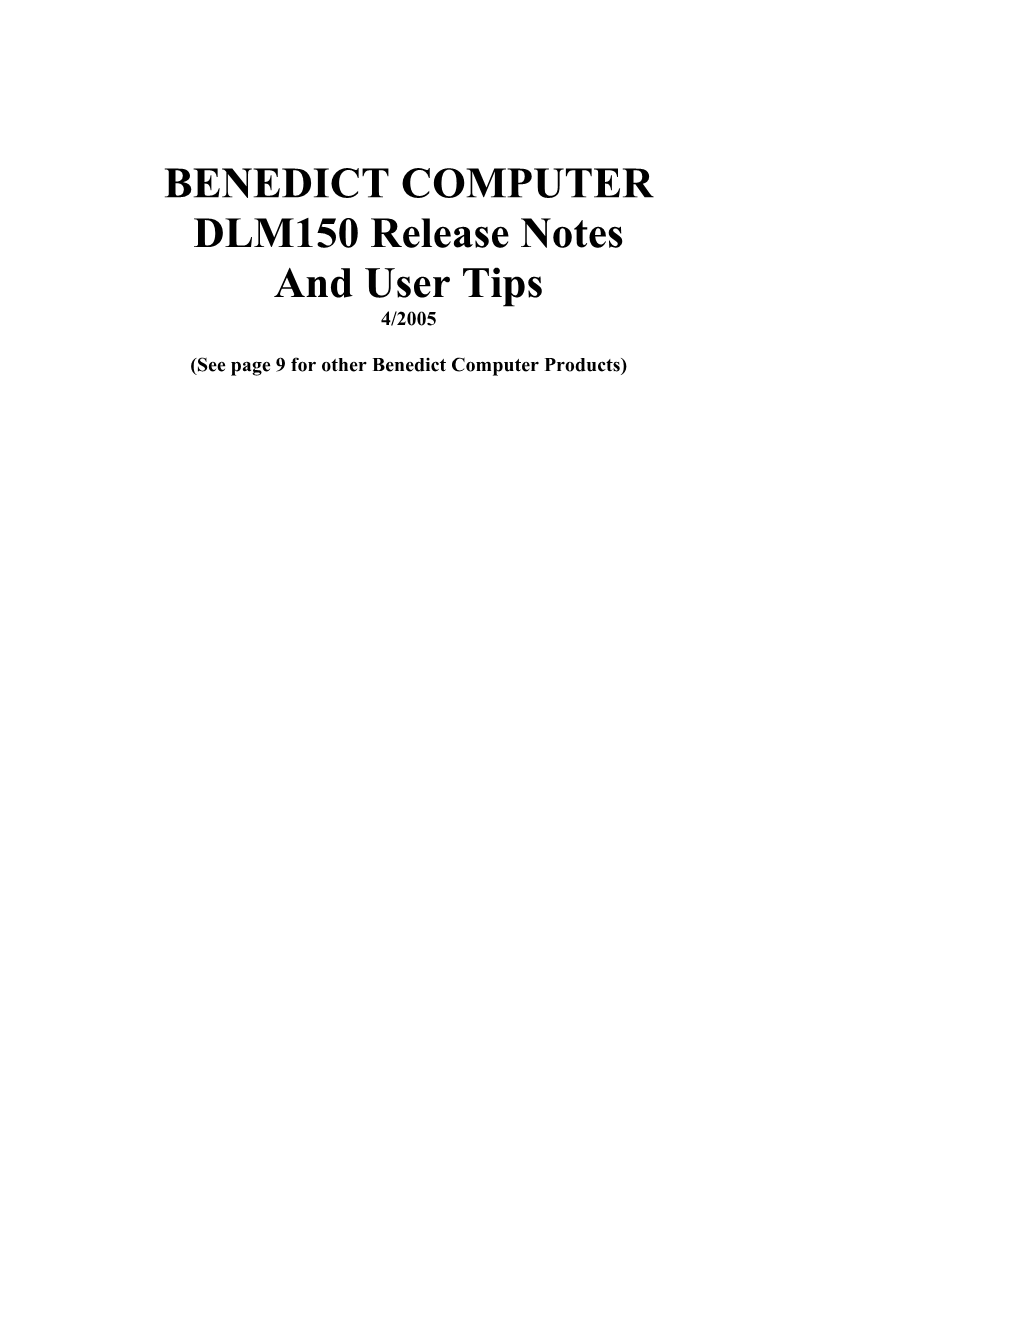 See Page 9 for Other Benedict Computer Products